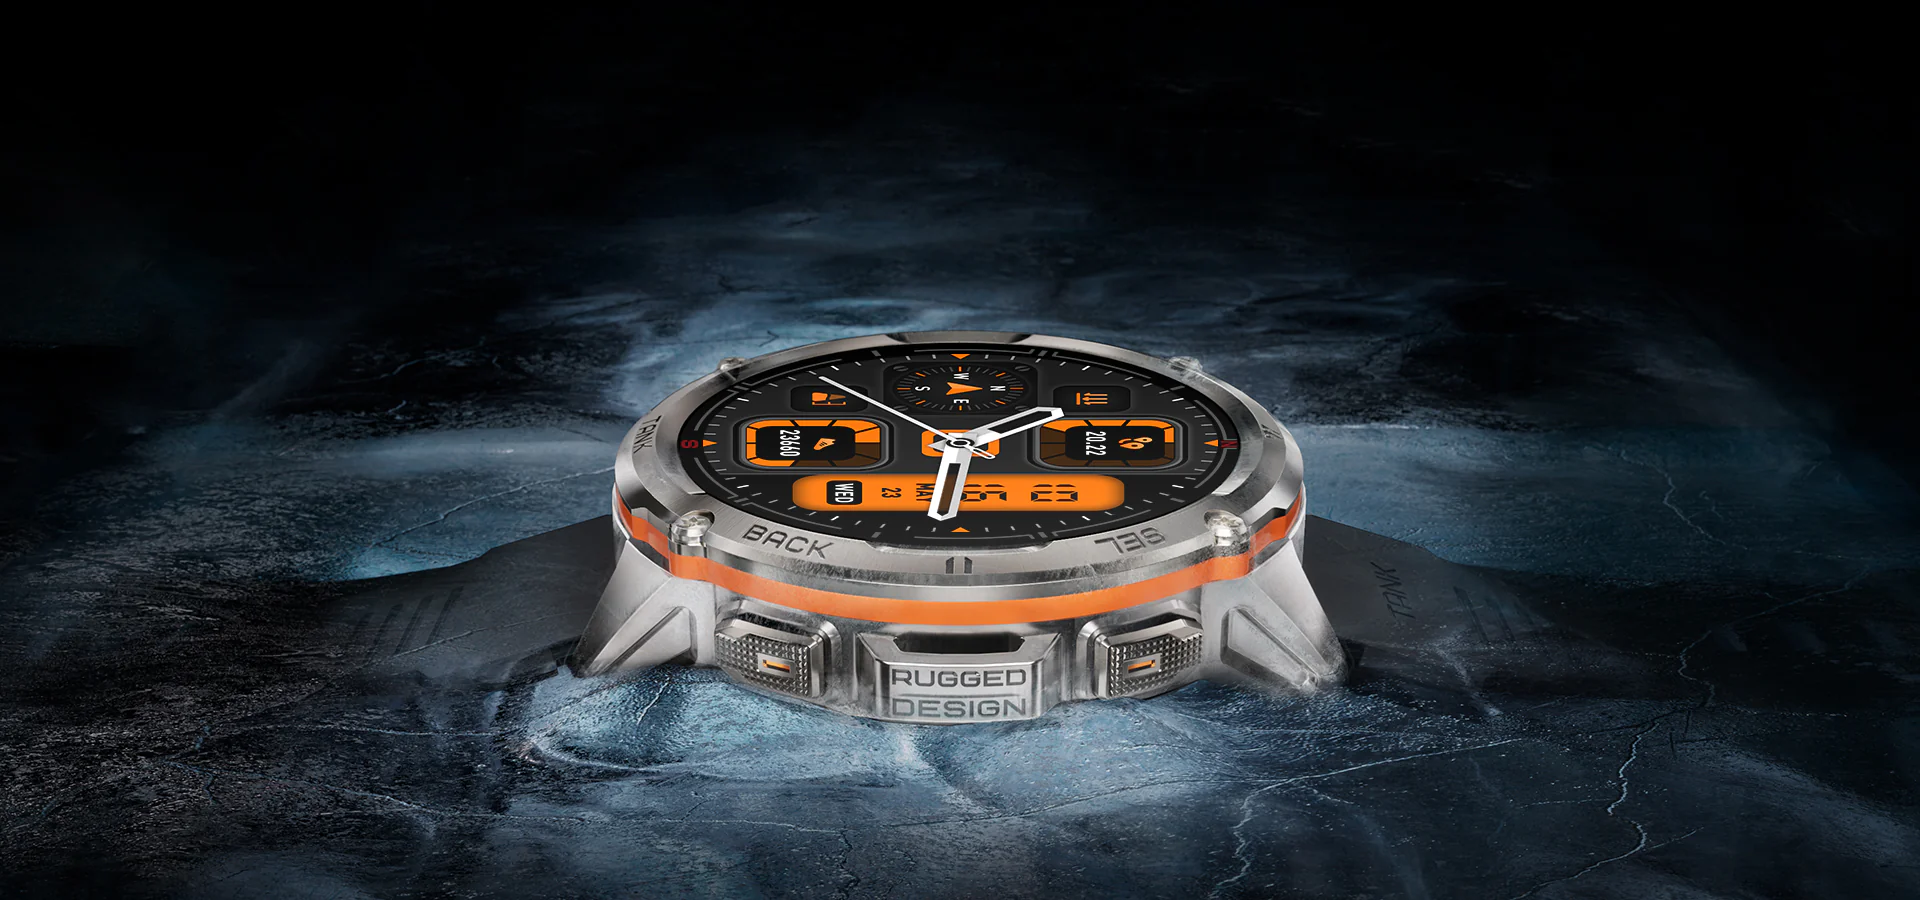 Kospet Tank T3 Ultra rugged smartwatch with compass, altimeter & GPS launched - News - News